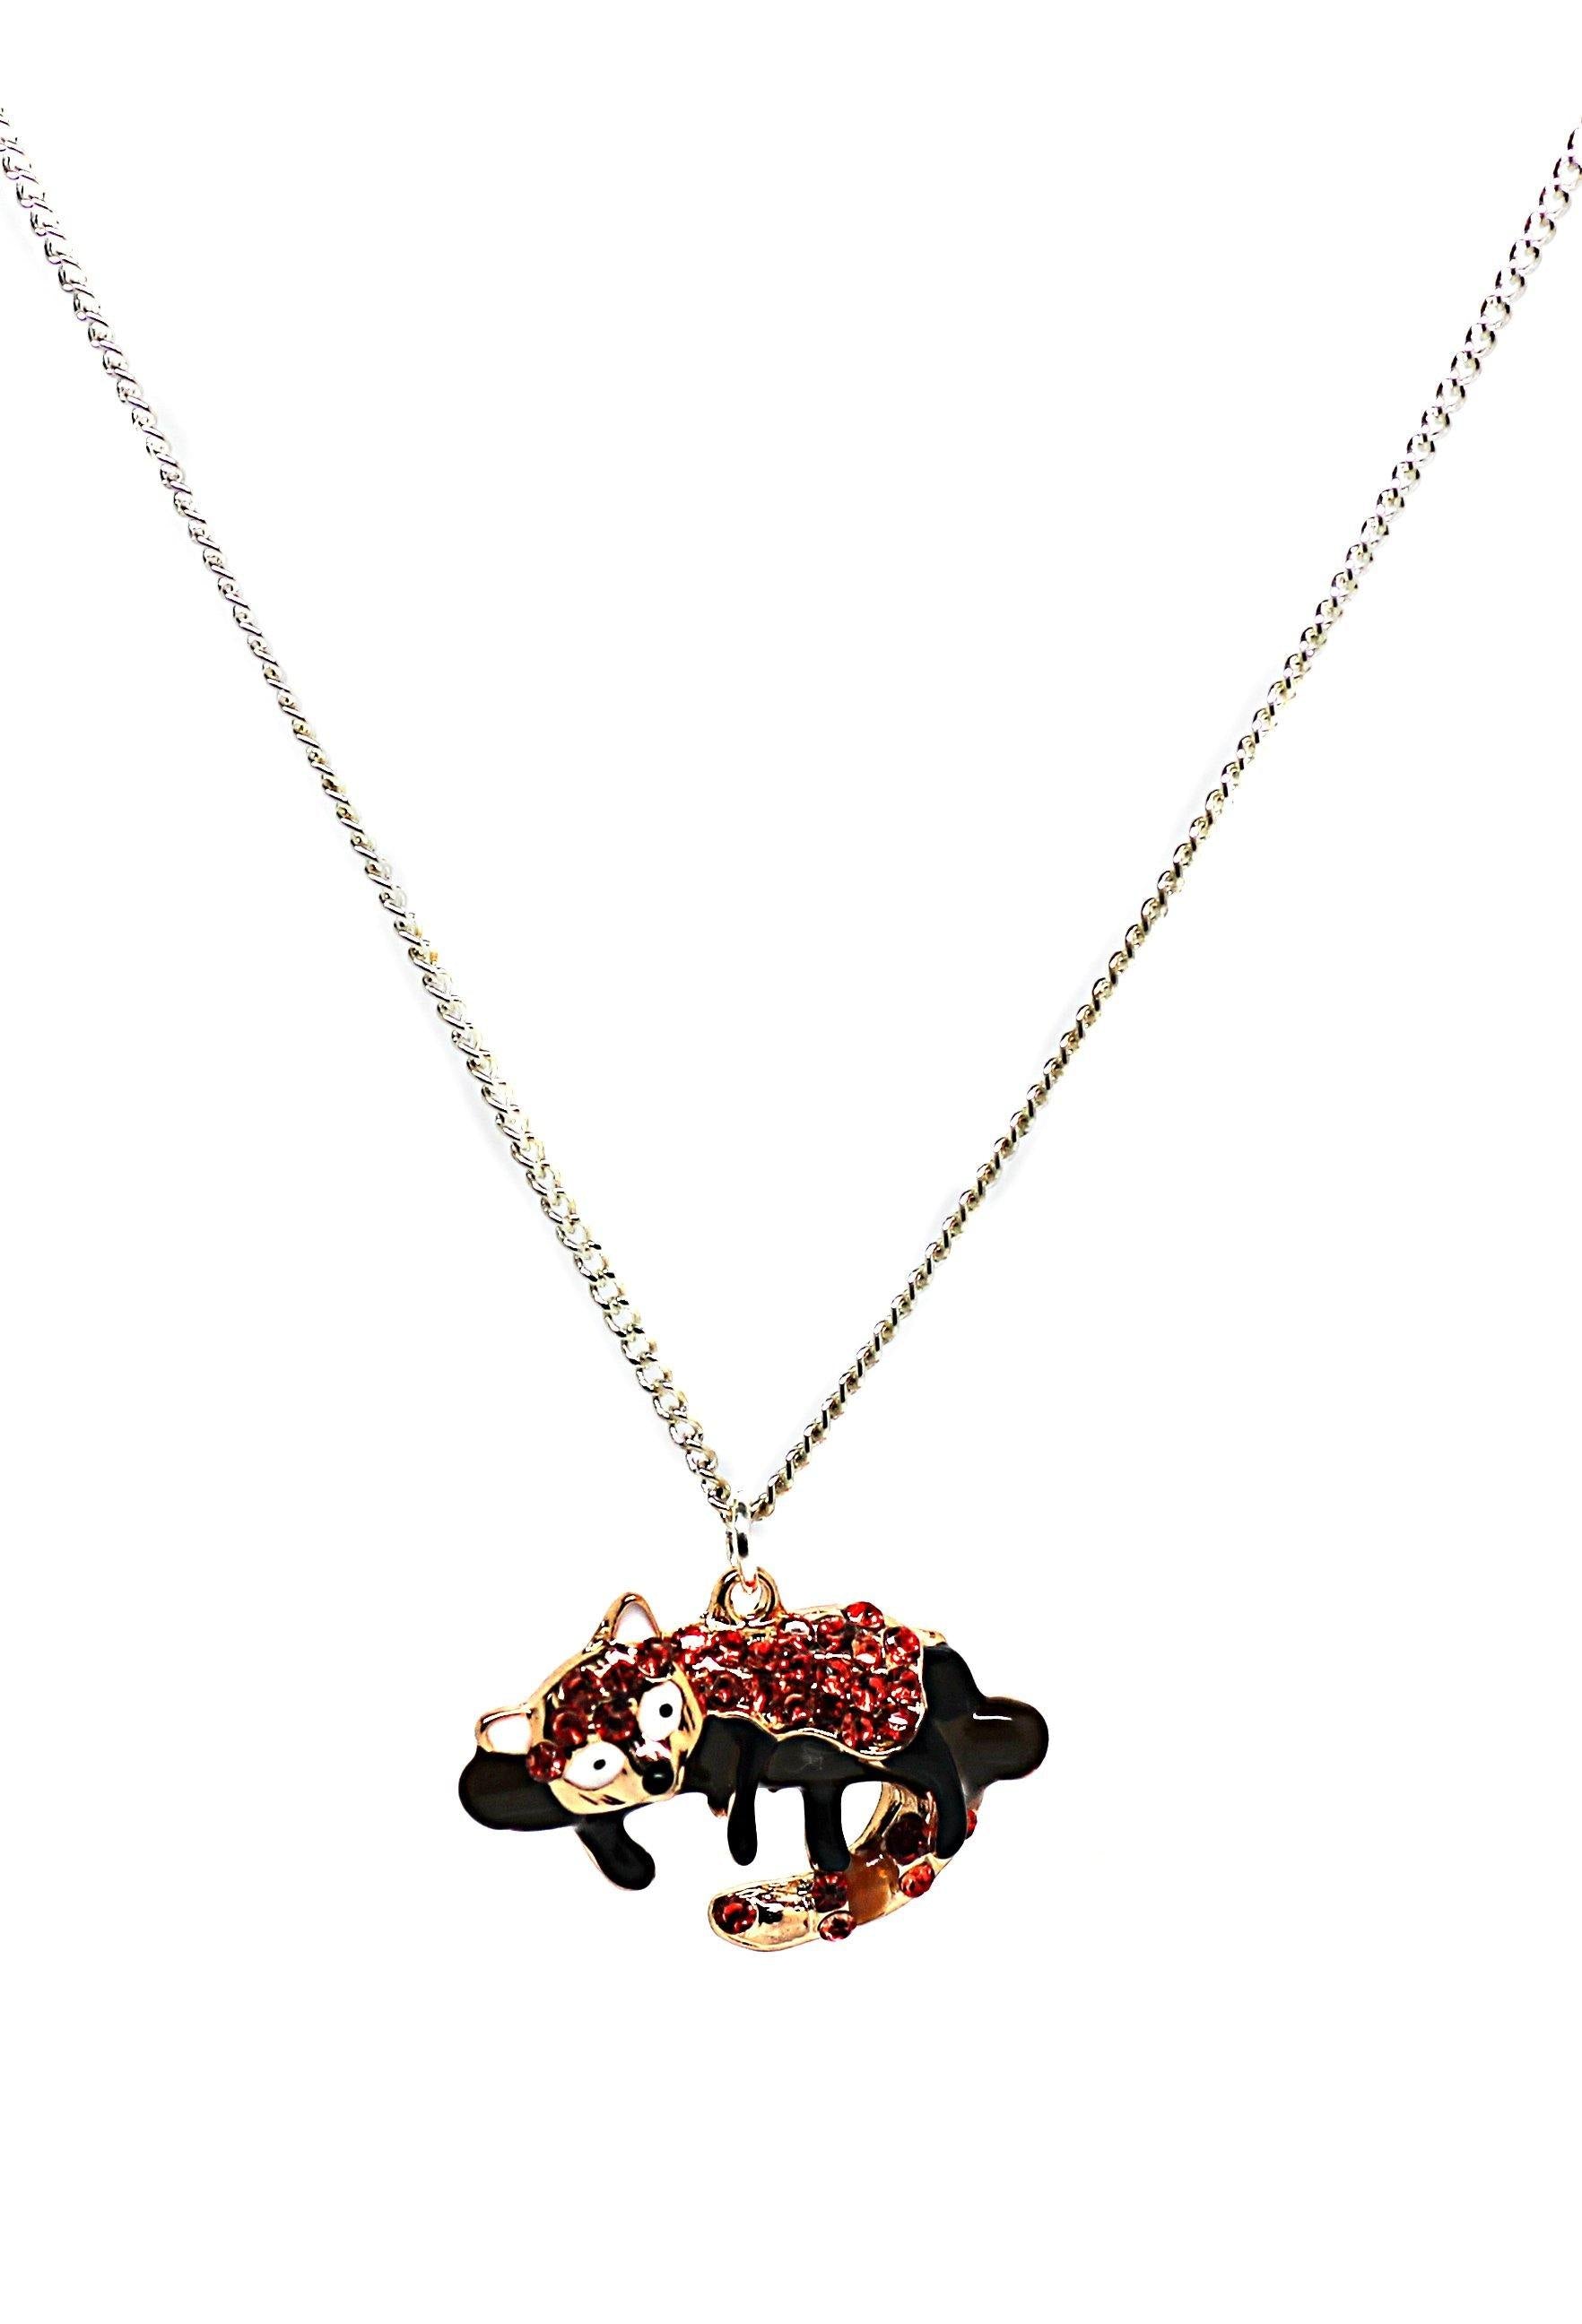 Red Panda Necklace - Wildtouch - Wildtouch